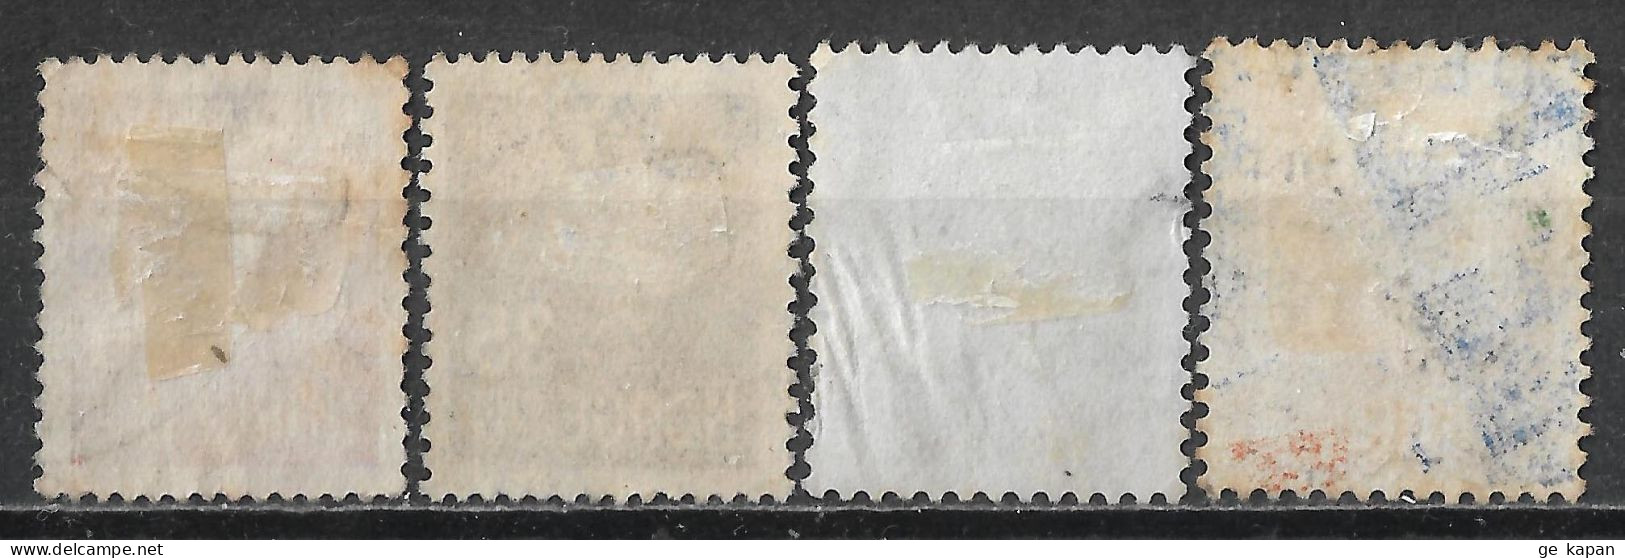 1927-1946 NORWAY SET OF 4 USED STAMPS (Michel # 124A,128A,220,321) - Used Stamps